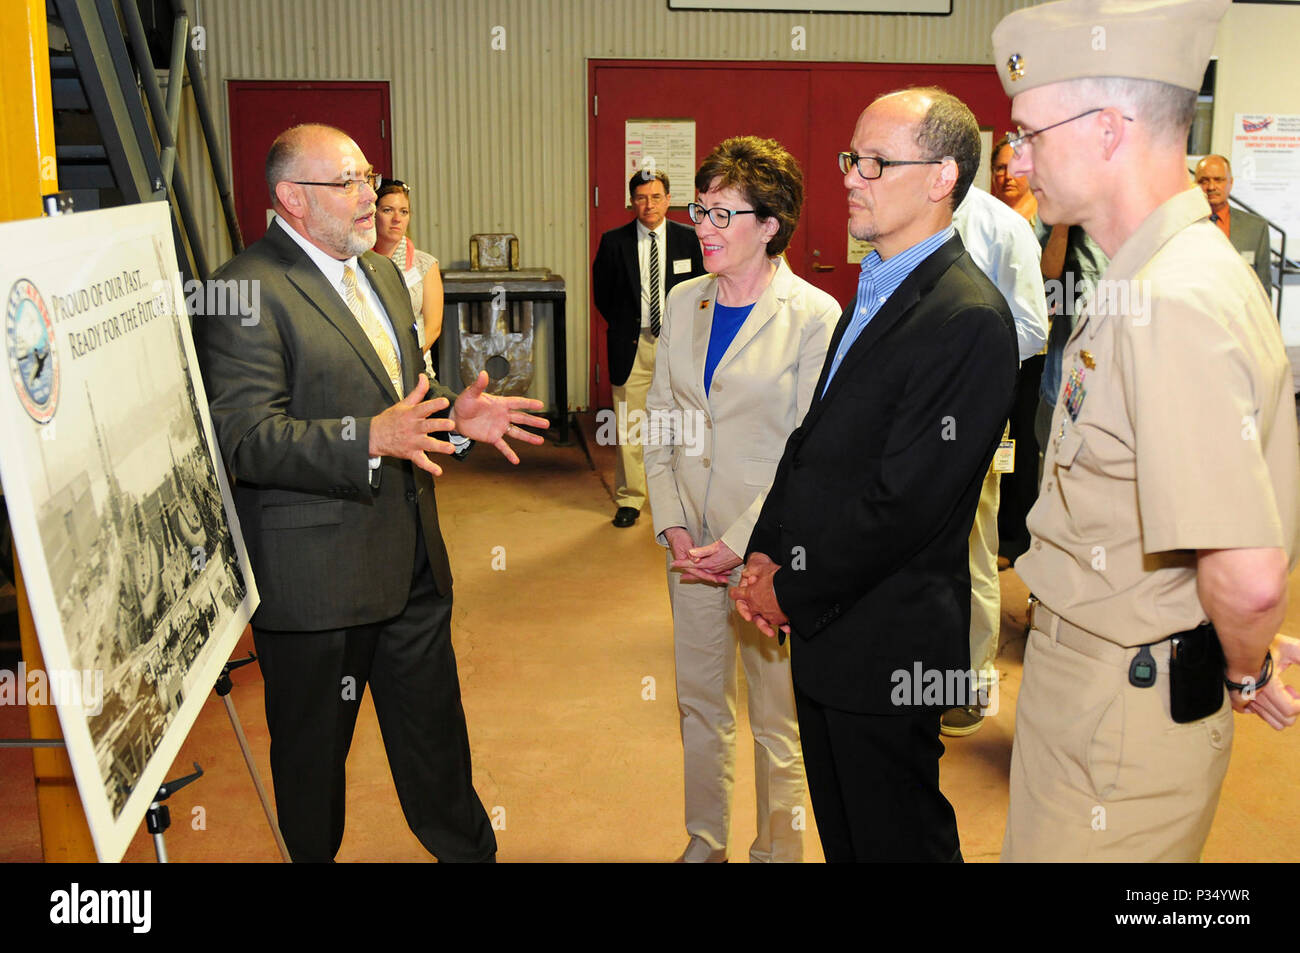 KITTERY, Maine -- 5/27/15 -- Portsmouth Naval Shipyard (PNS) Deputy Public Affairs Officer Gary Hildreth, left, briefs U.S. Senator Susan Collins (R-Maine), U.S. Secretary of Labor, Thomas Perez and PNS Commanding Officer, U.S. Navy Capt Bill Greene at PNS in Kittery on Wednesday.  The delegation visited Bath Iron Works in Bath and Portsmouth Naval Shipyard in Kittery to promote private and public partnerships supporting apprenticeships in the maritime industry. Stock Photo